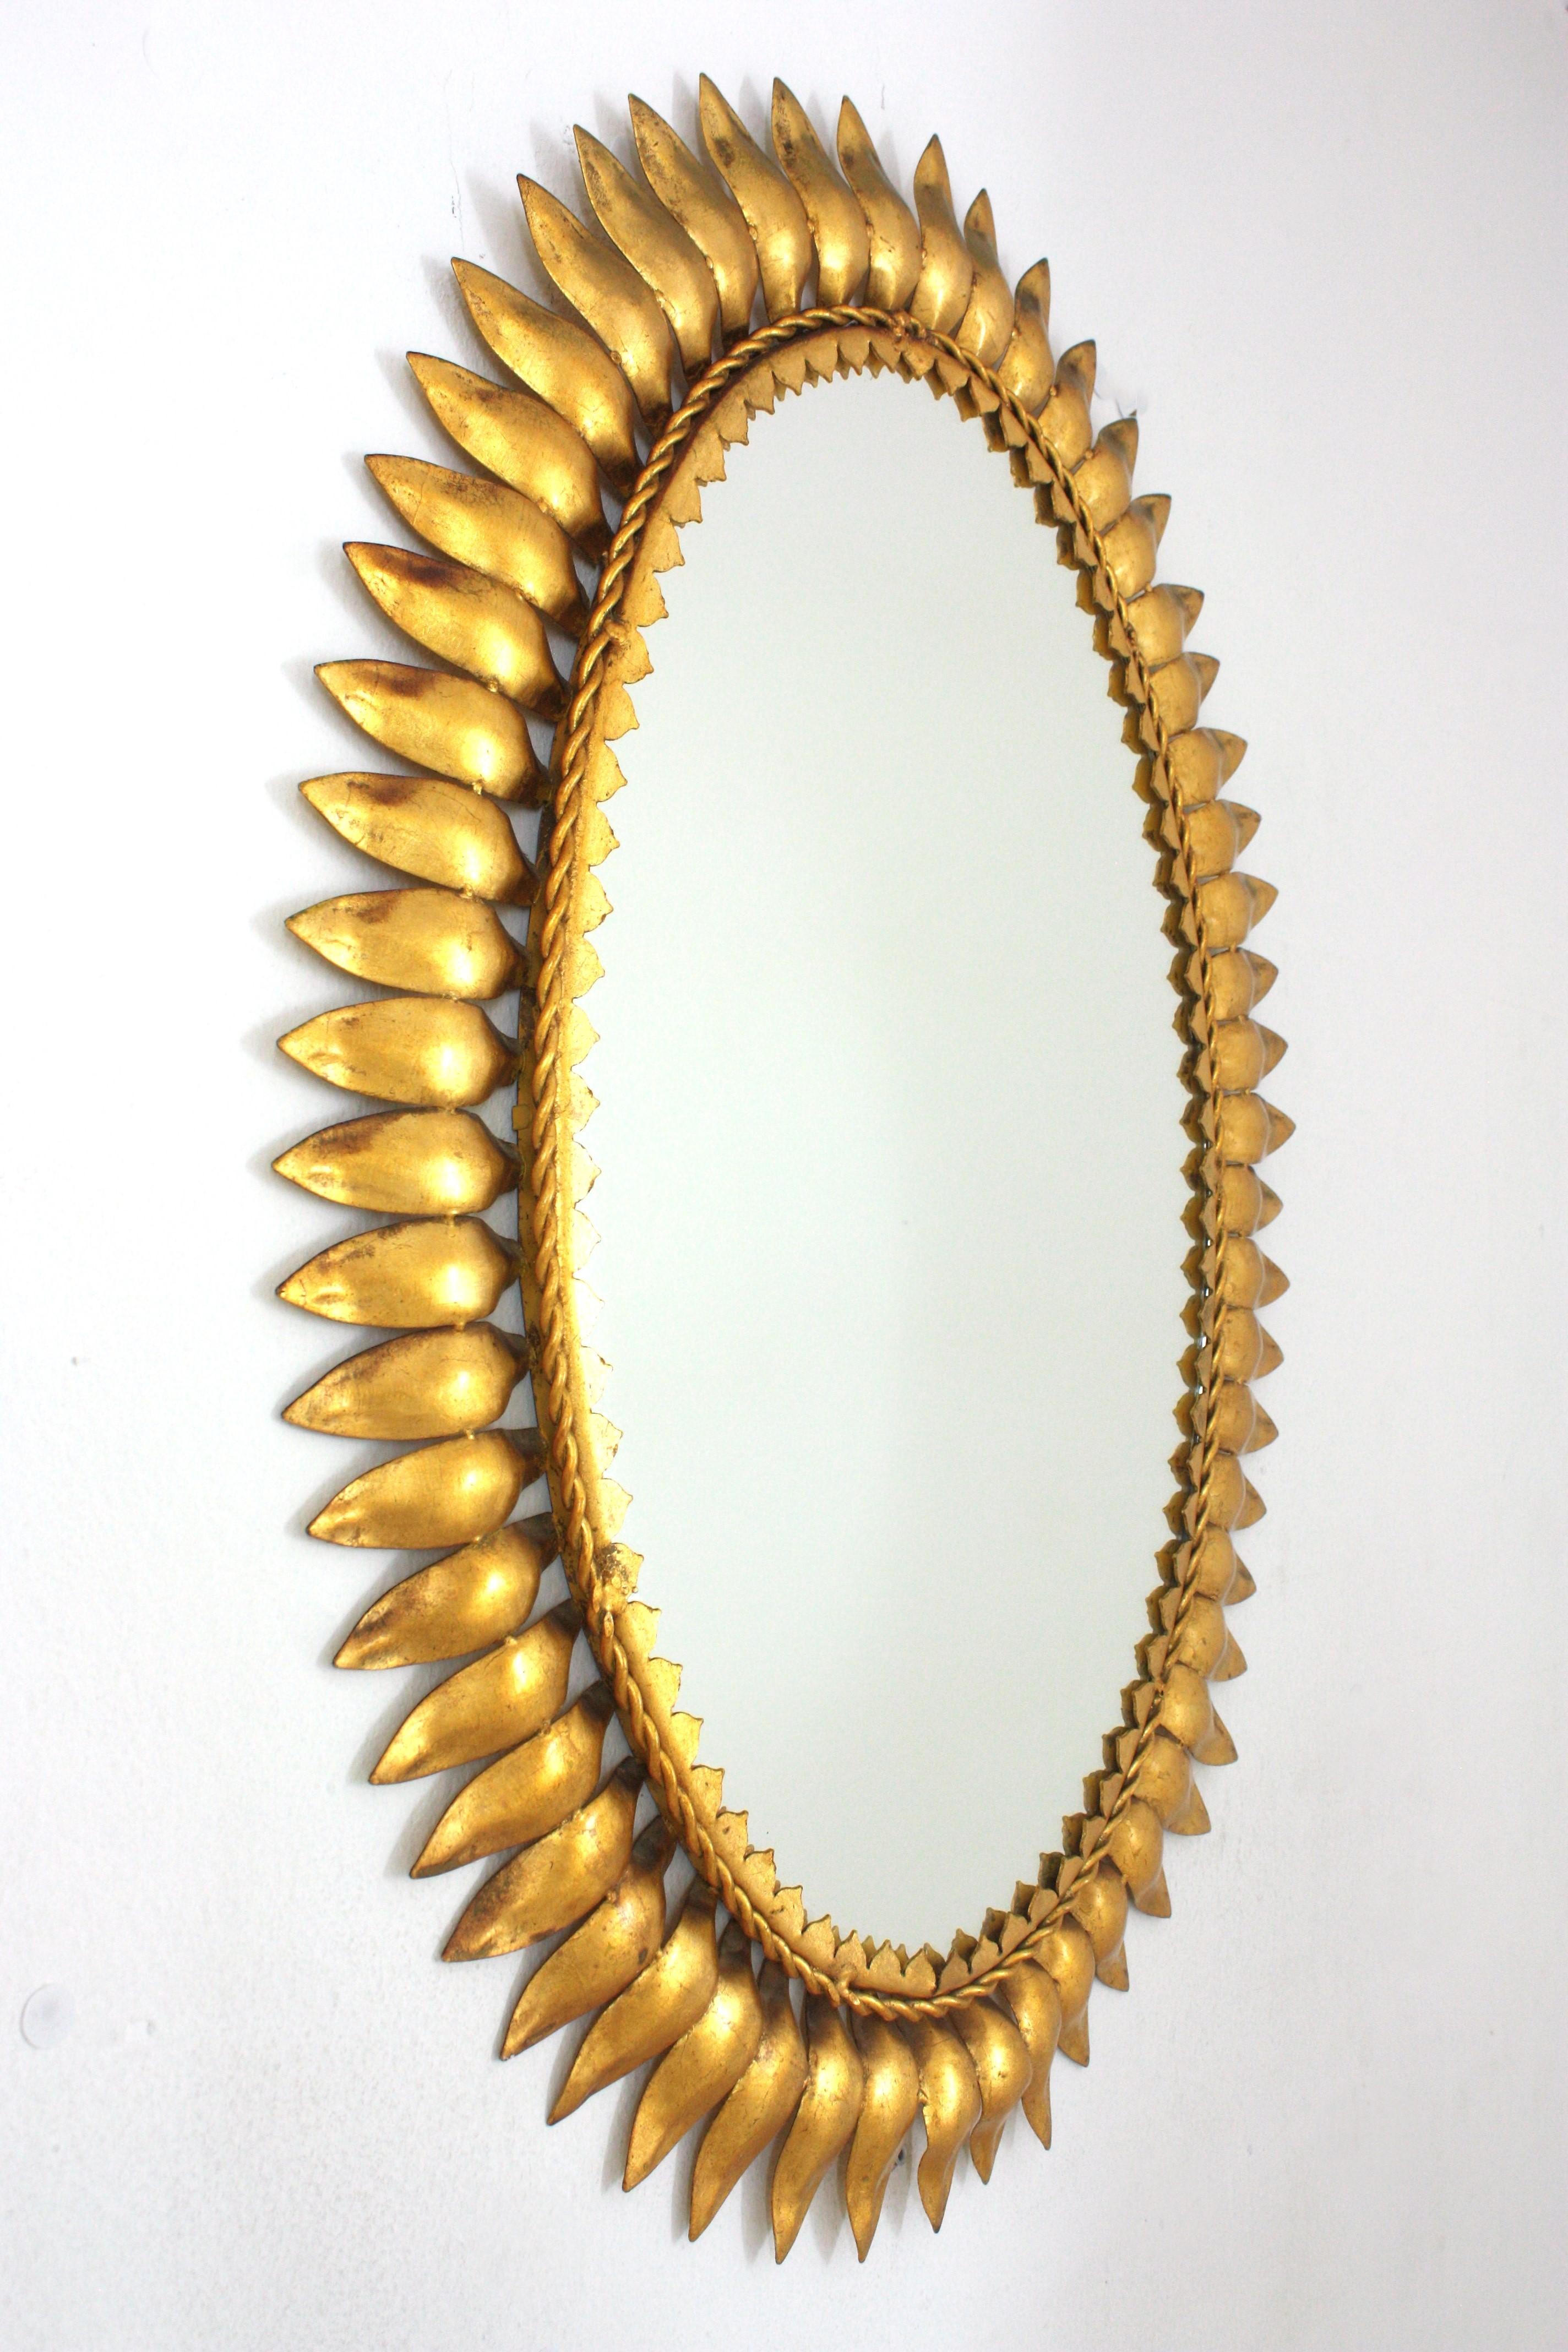 Hand-Crafted Sunburst Oval Mirror in Gilt Metal, Spain, 1950s